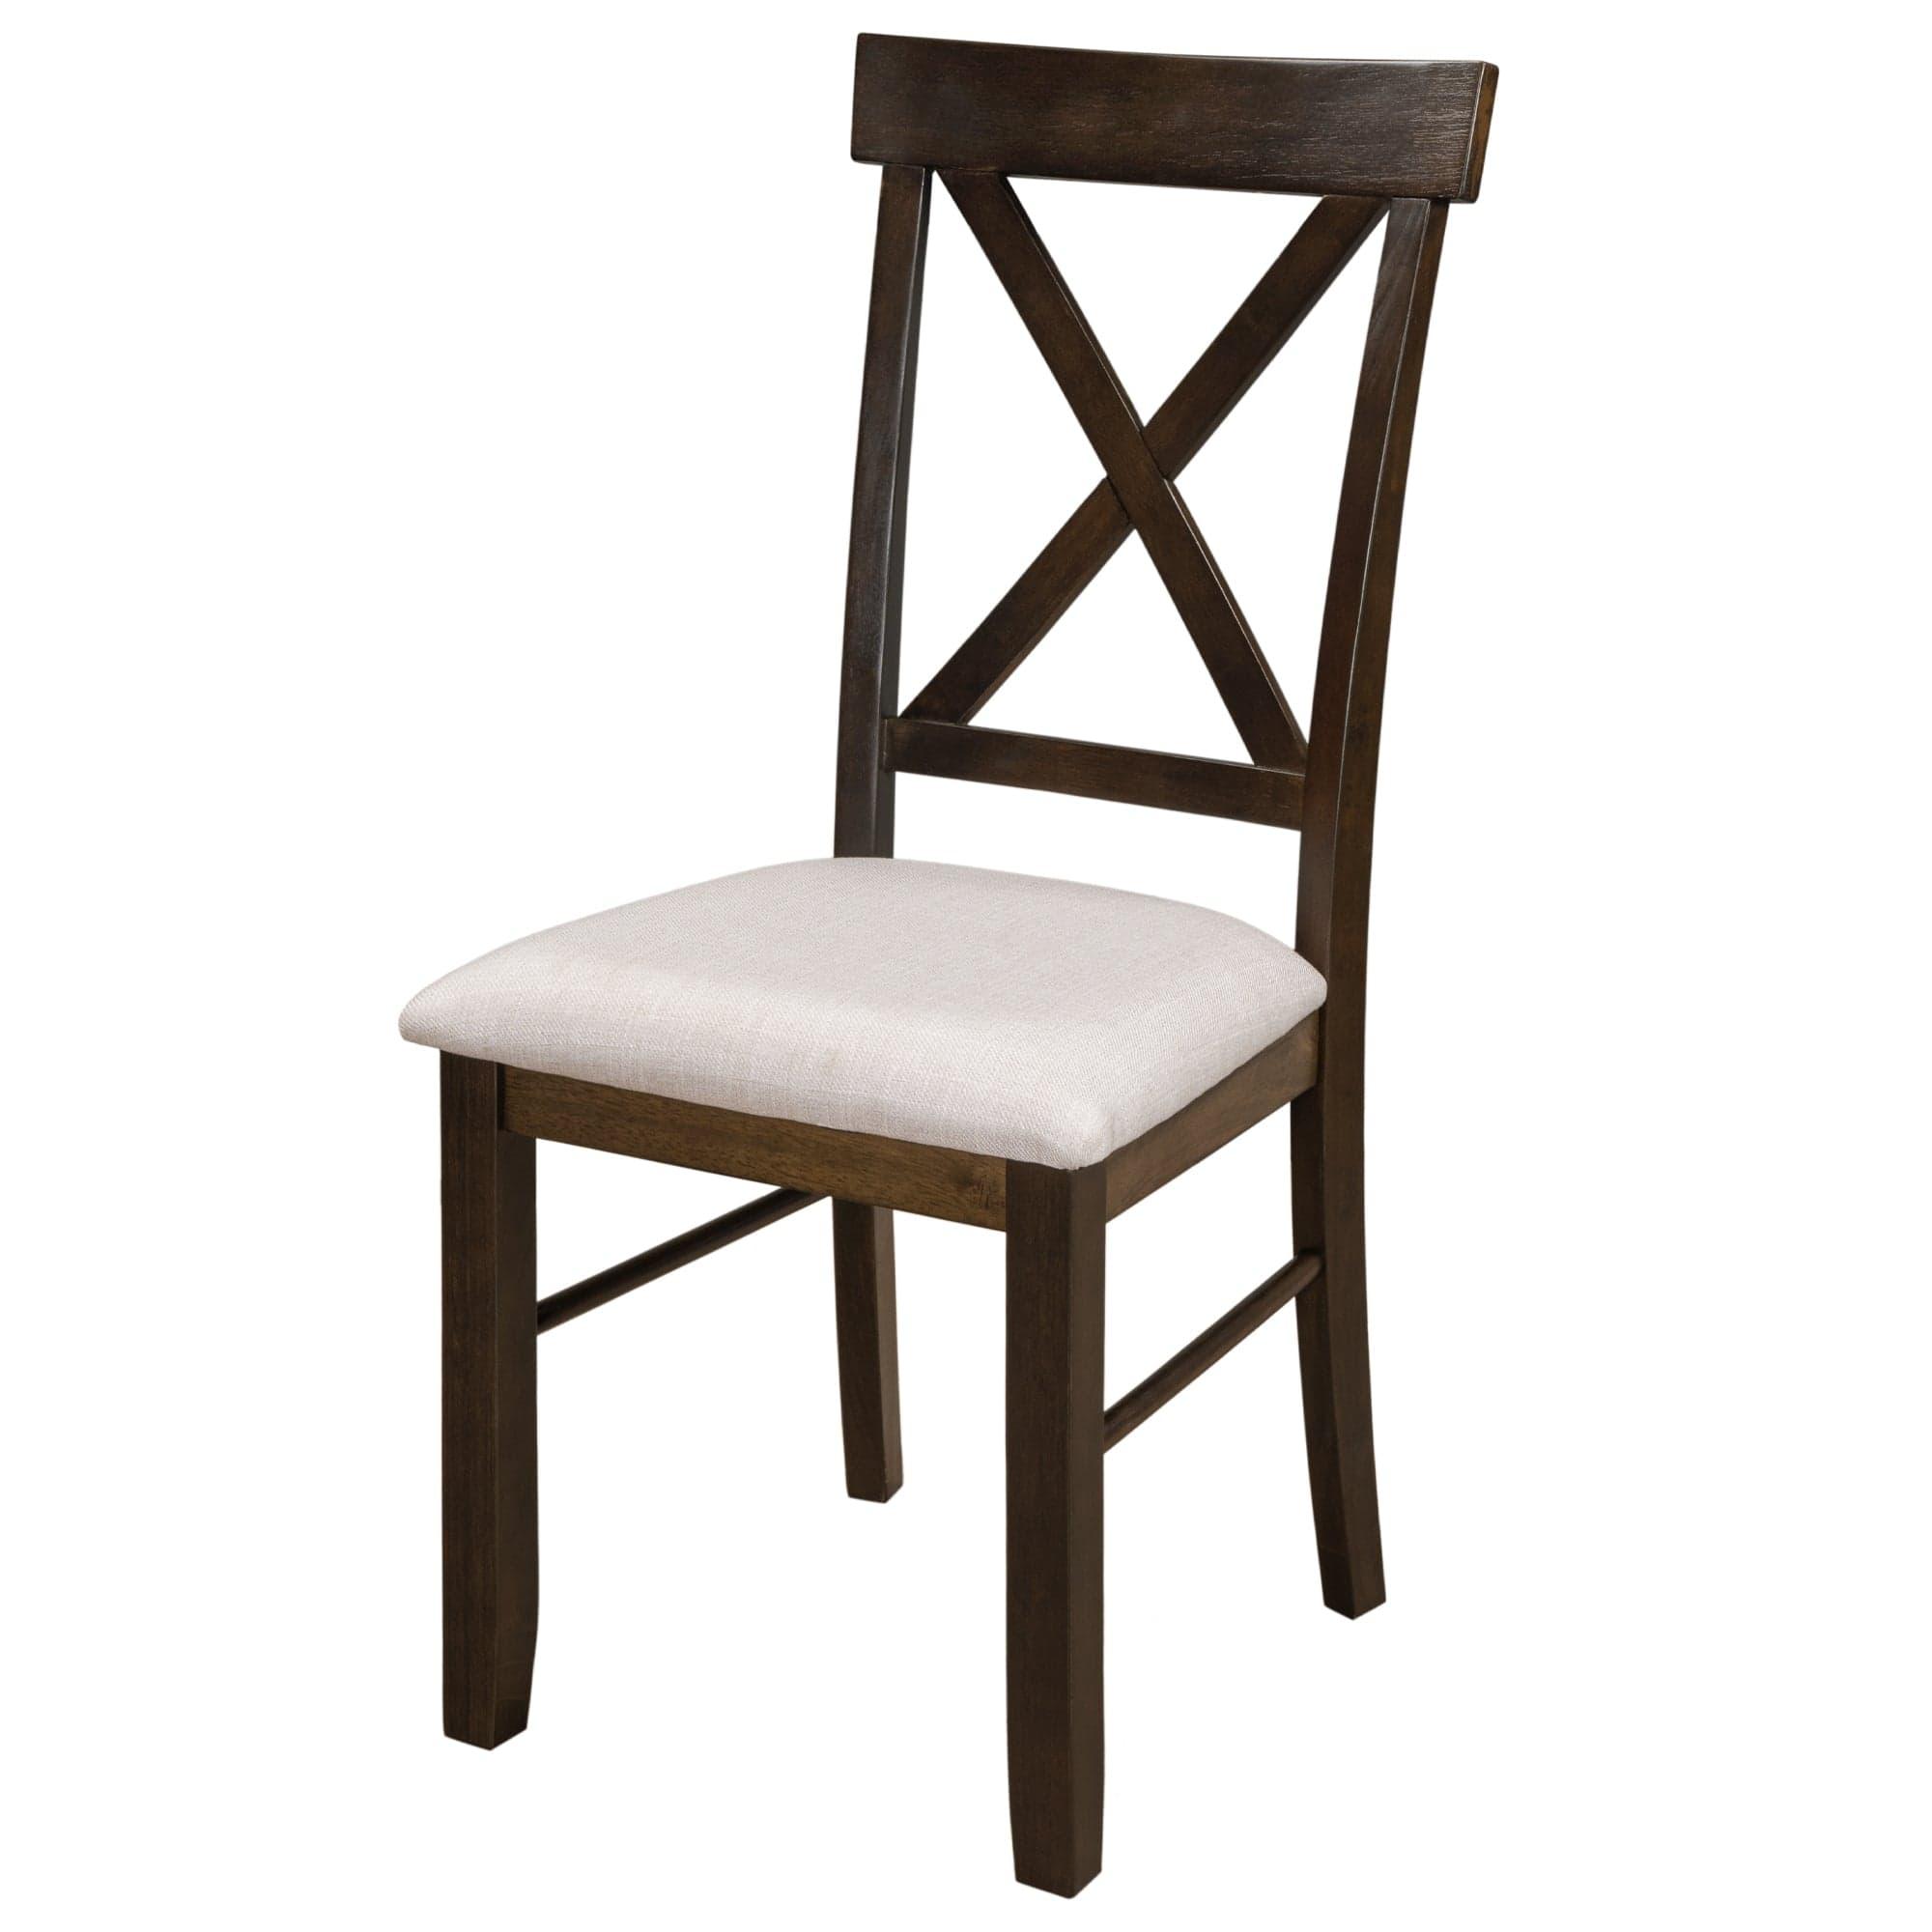 Shop TOPMAX 2 Pieces Farmhouse Rustic Wood Kitchen Upholstered X-Back Dining Chairs, Brown+Beige Mademoiselle Home Decor